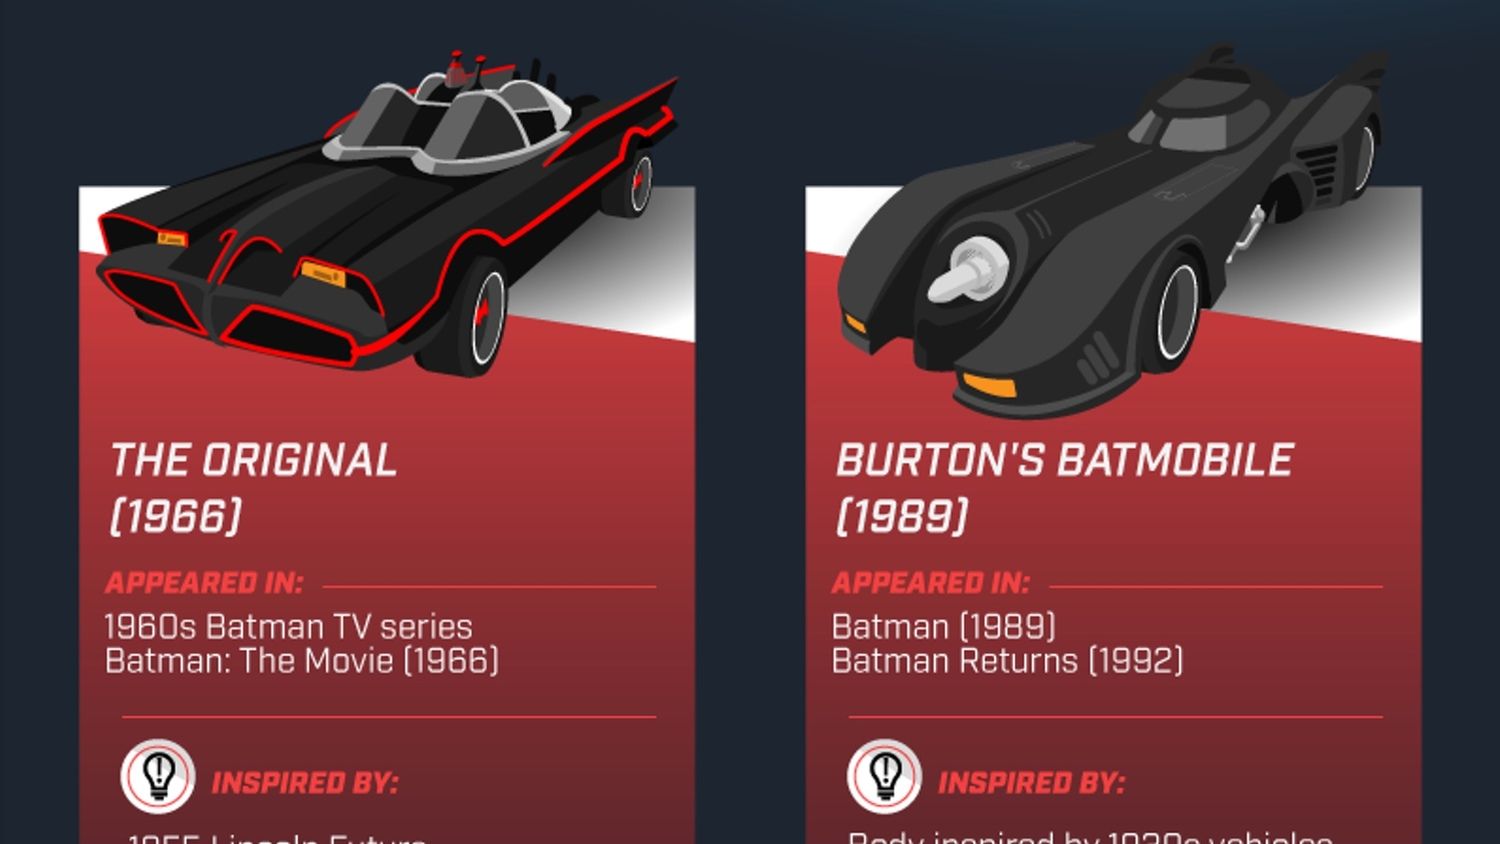 Batmobile Infographic Breaks Down the Speed, Cost, and Specs